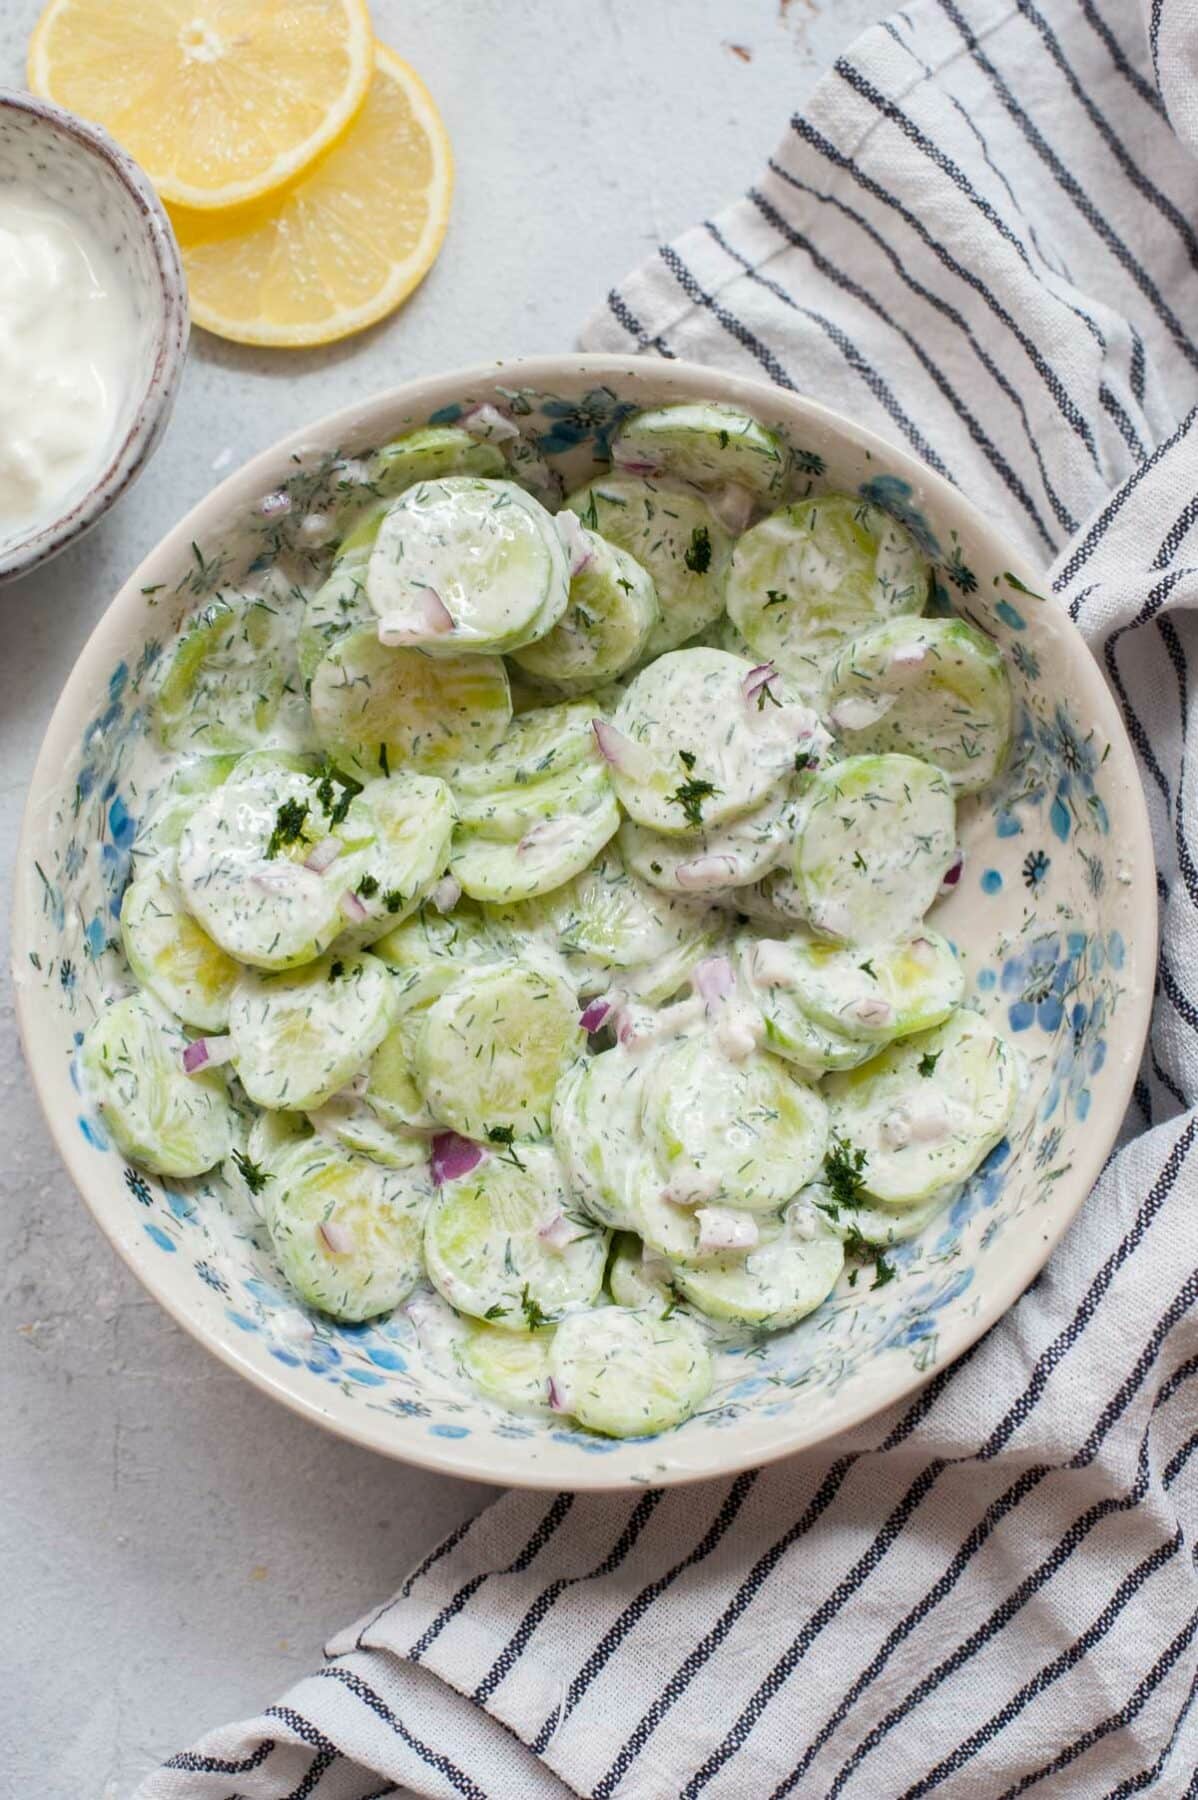 Mizeria (Polish cucumber salad) in a white bowl. Lemon slices and kitchen cloth in the background.